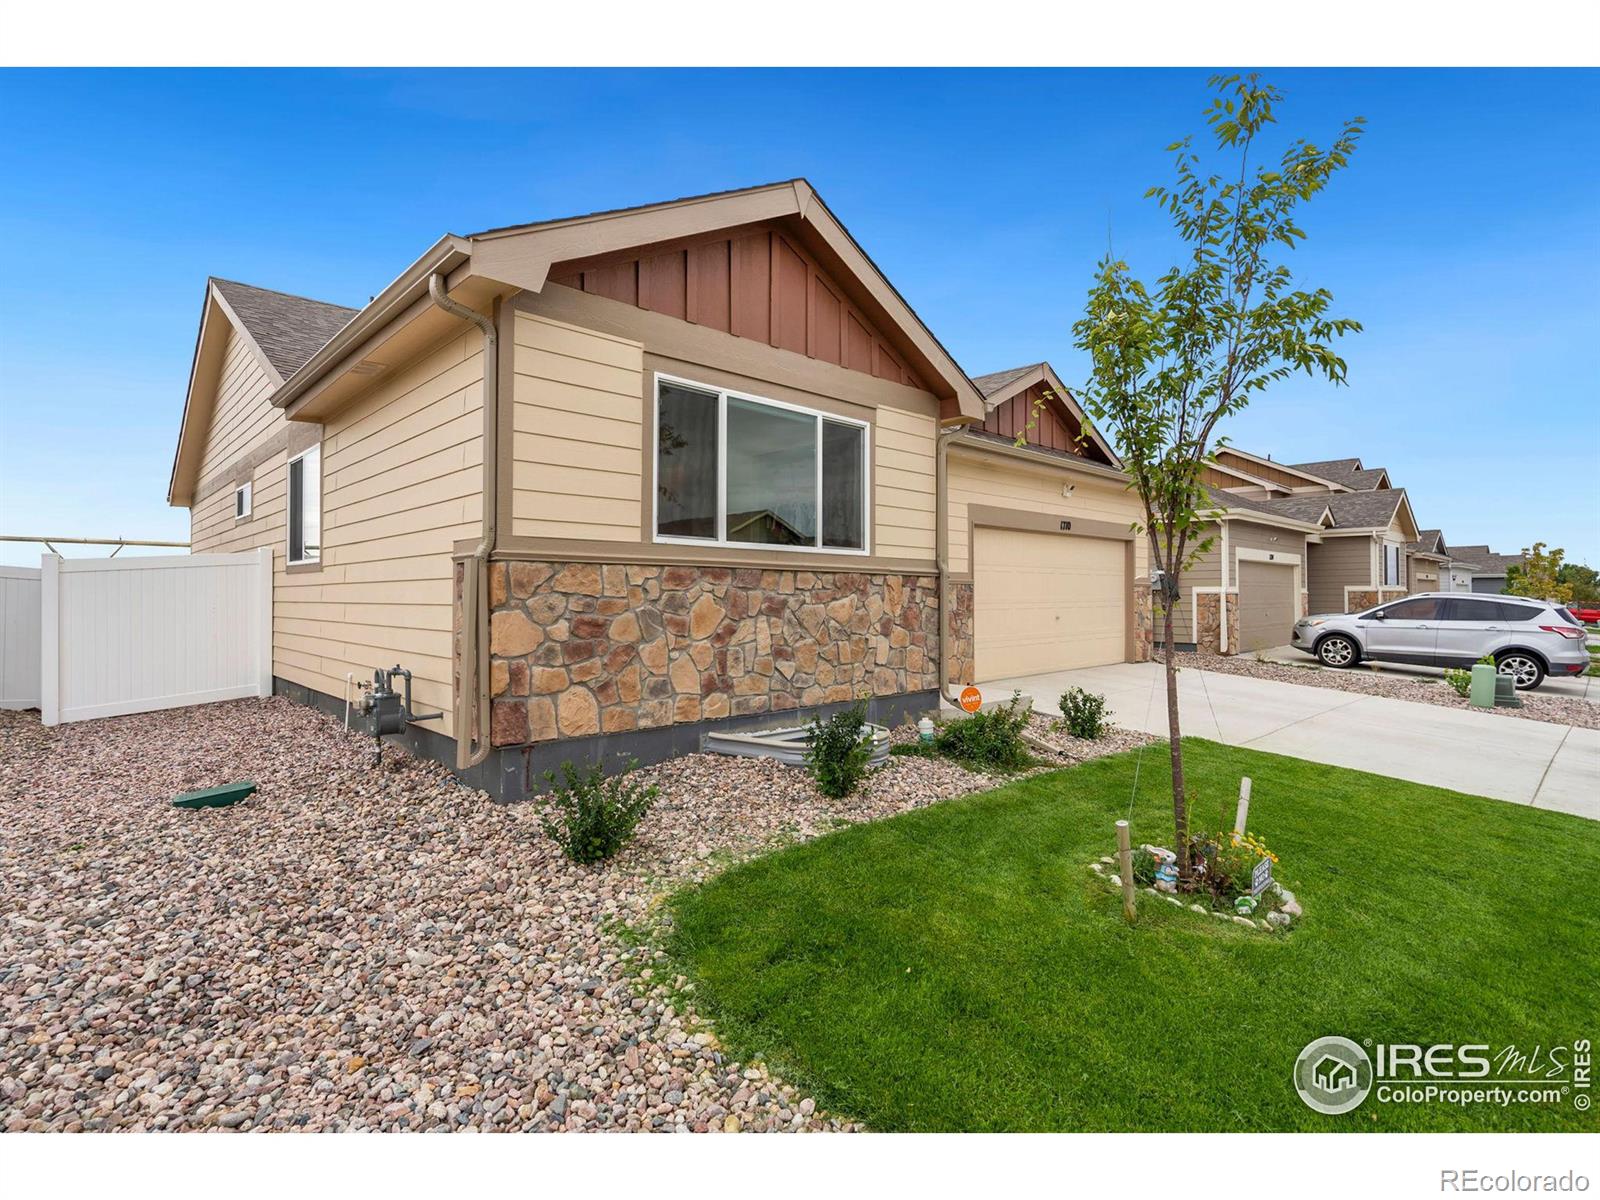 1710  101st Ave Ct, greeley MLS: 456789999021 Beds: 3 Baths: 2 Price: $450,000